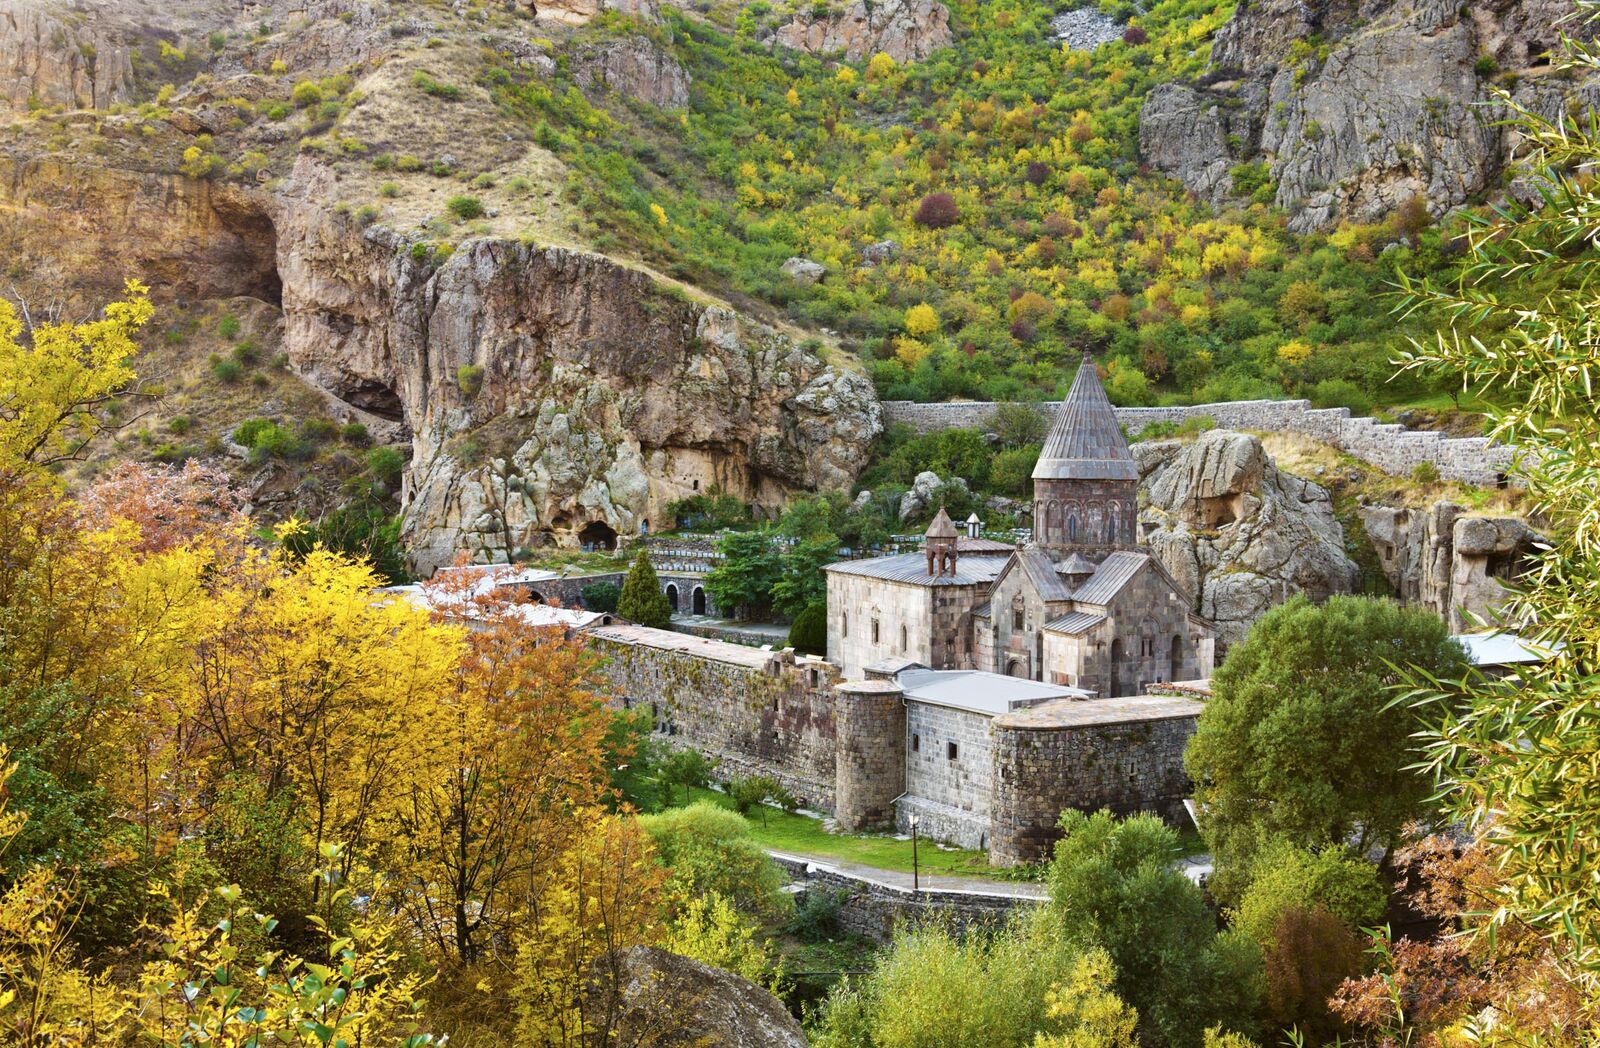 relates to Why You Should Go to Armenia Now, in 15 Inspiring Photos